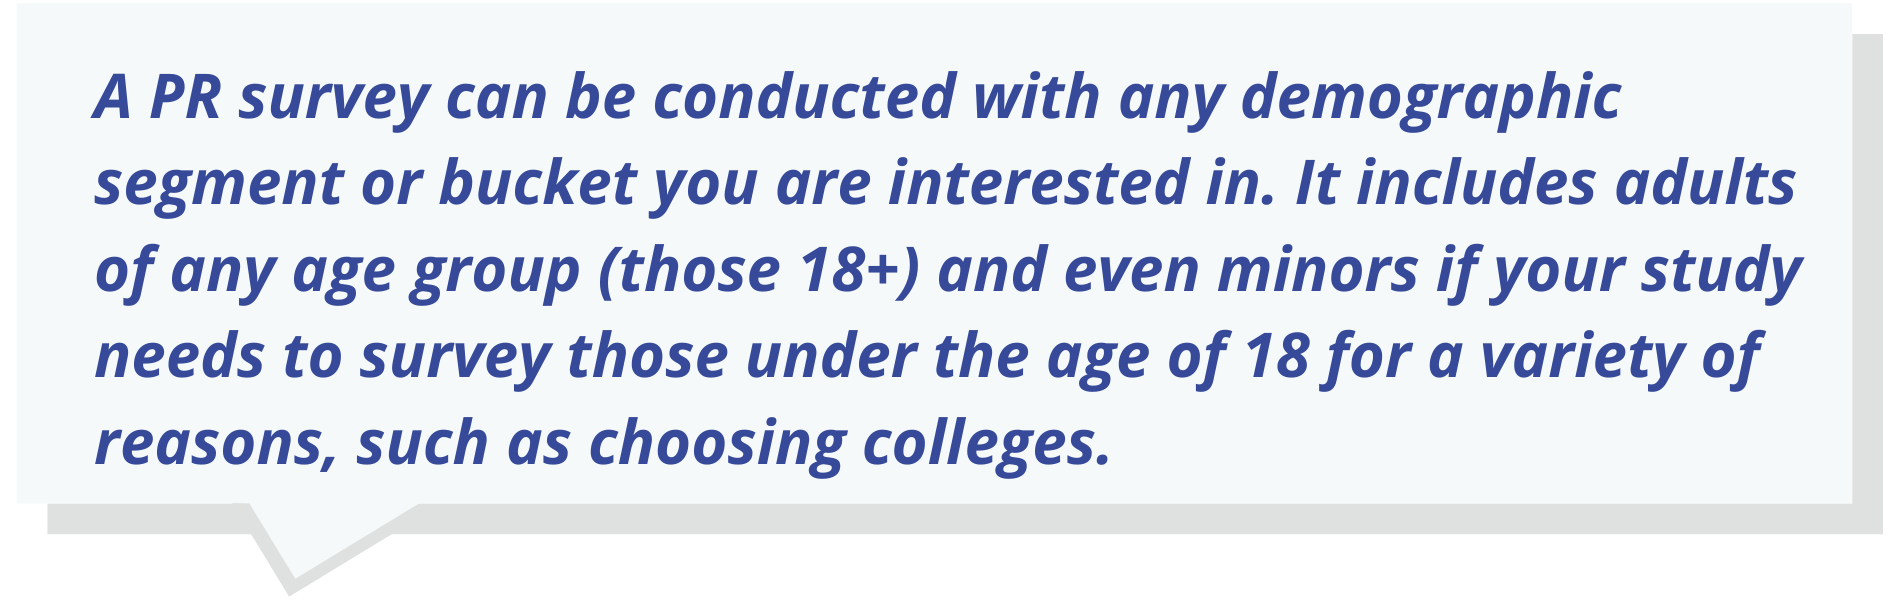 Quote Text: A PR survey can be conducted with any demographic segment or bucket you are interested in.  It includes adults of any age group (those 18+) and even minors if your study needs to survey those under the age of 18 for a variety of reasons, such as choosing colleges.